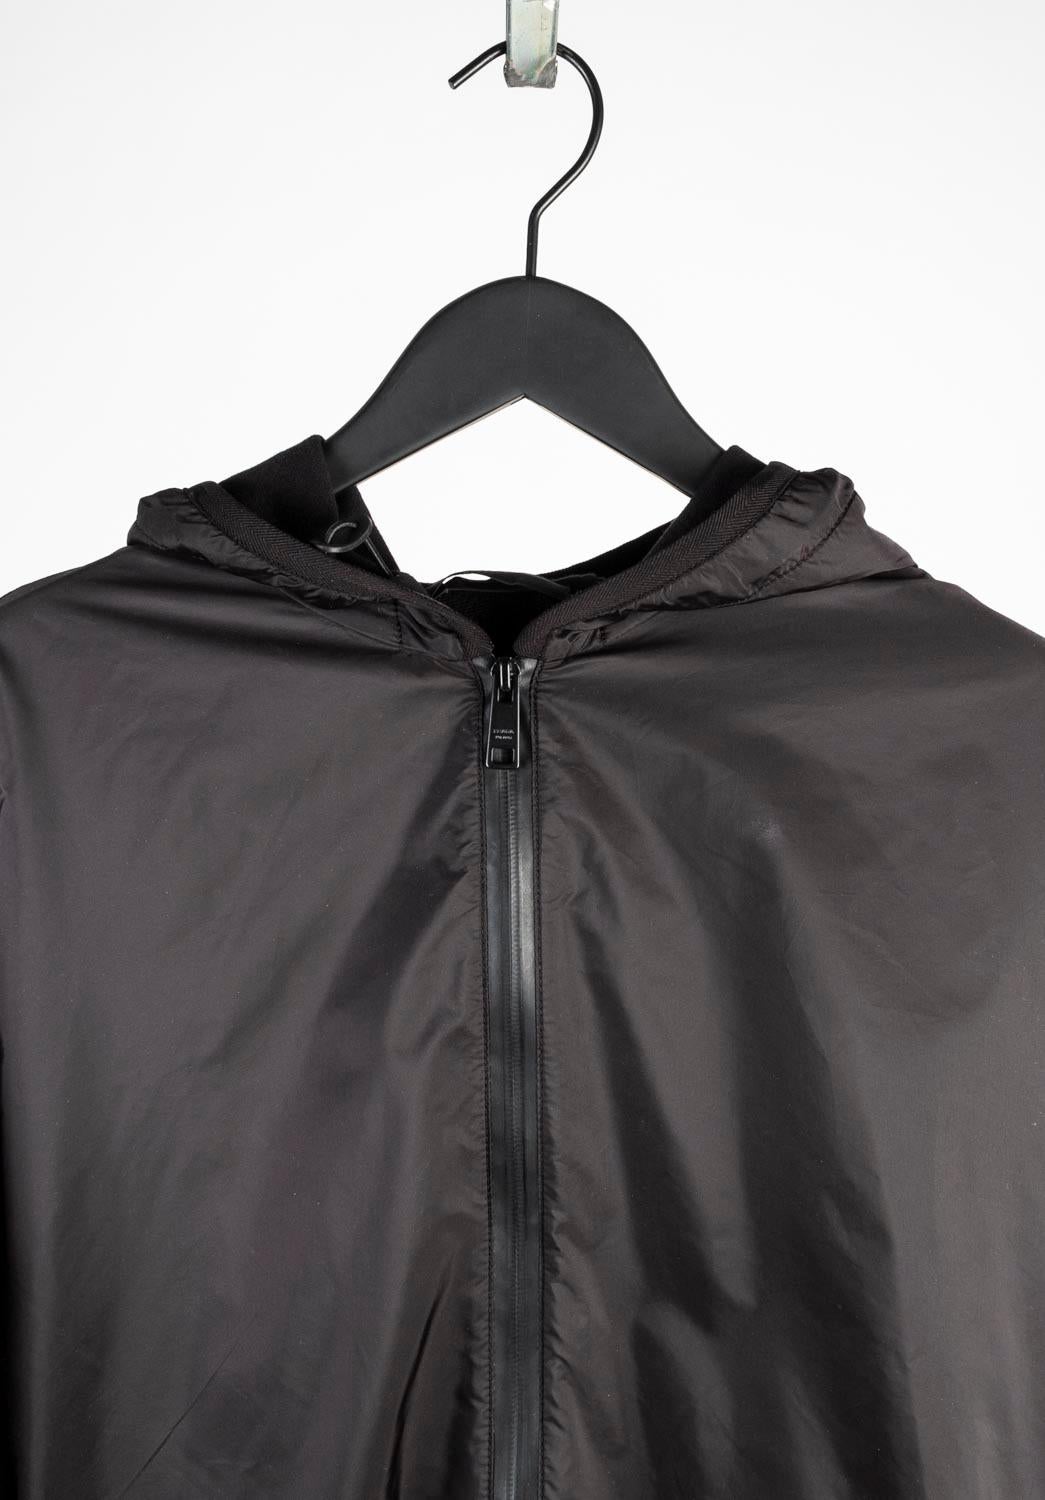 100% genuine Prada Hooded Men Jacket, S705
Color: black
(An actual color may a bit vary due to individual computer screen interpretation)
Material: cotton, front polyamide
Tag size: XXL runs L/XL (little smaller as for all Prada)
This jacket is